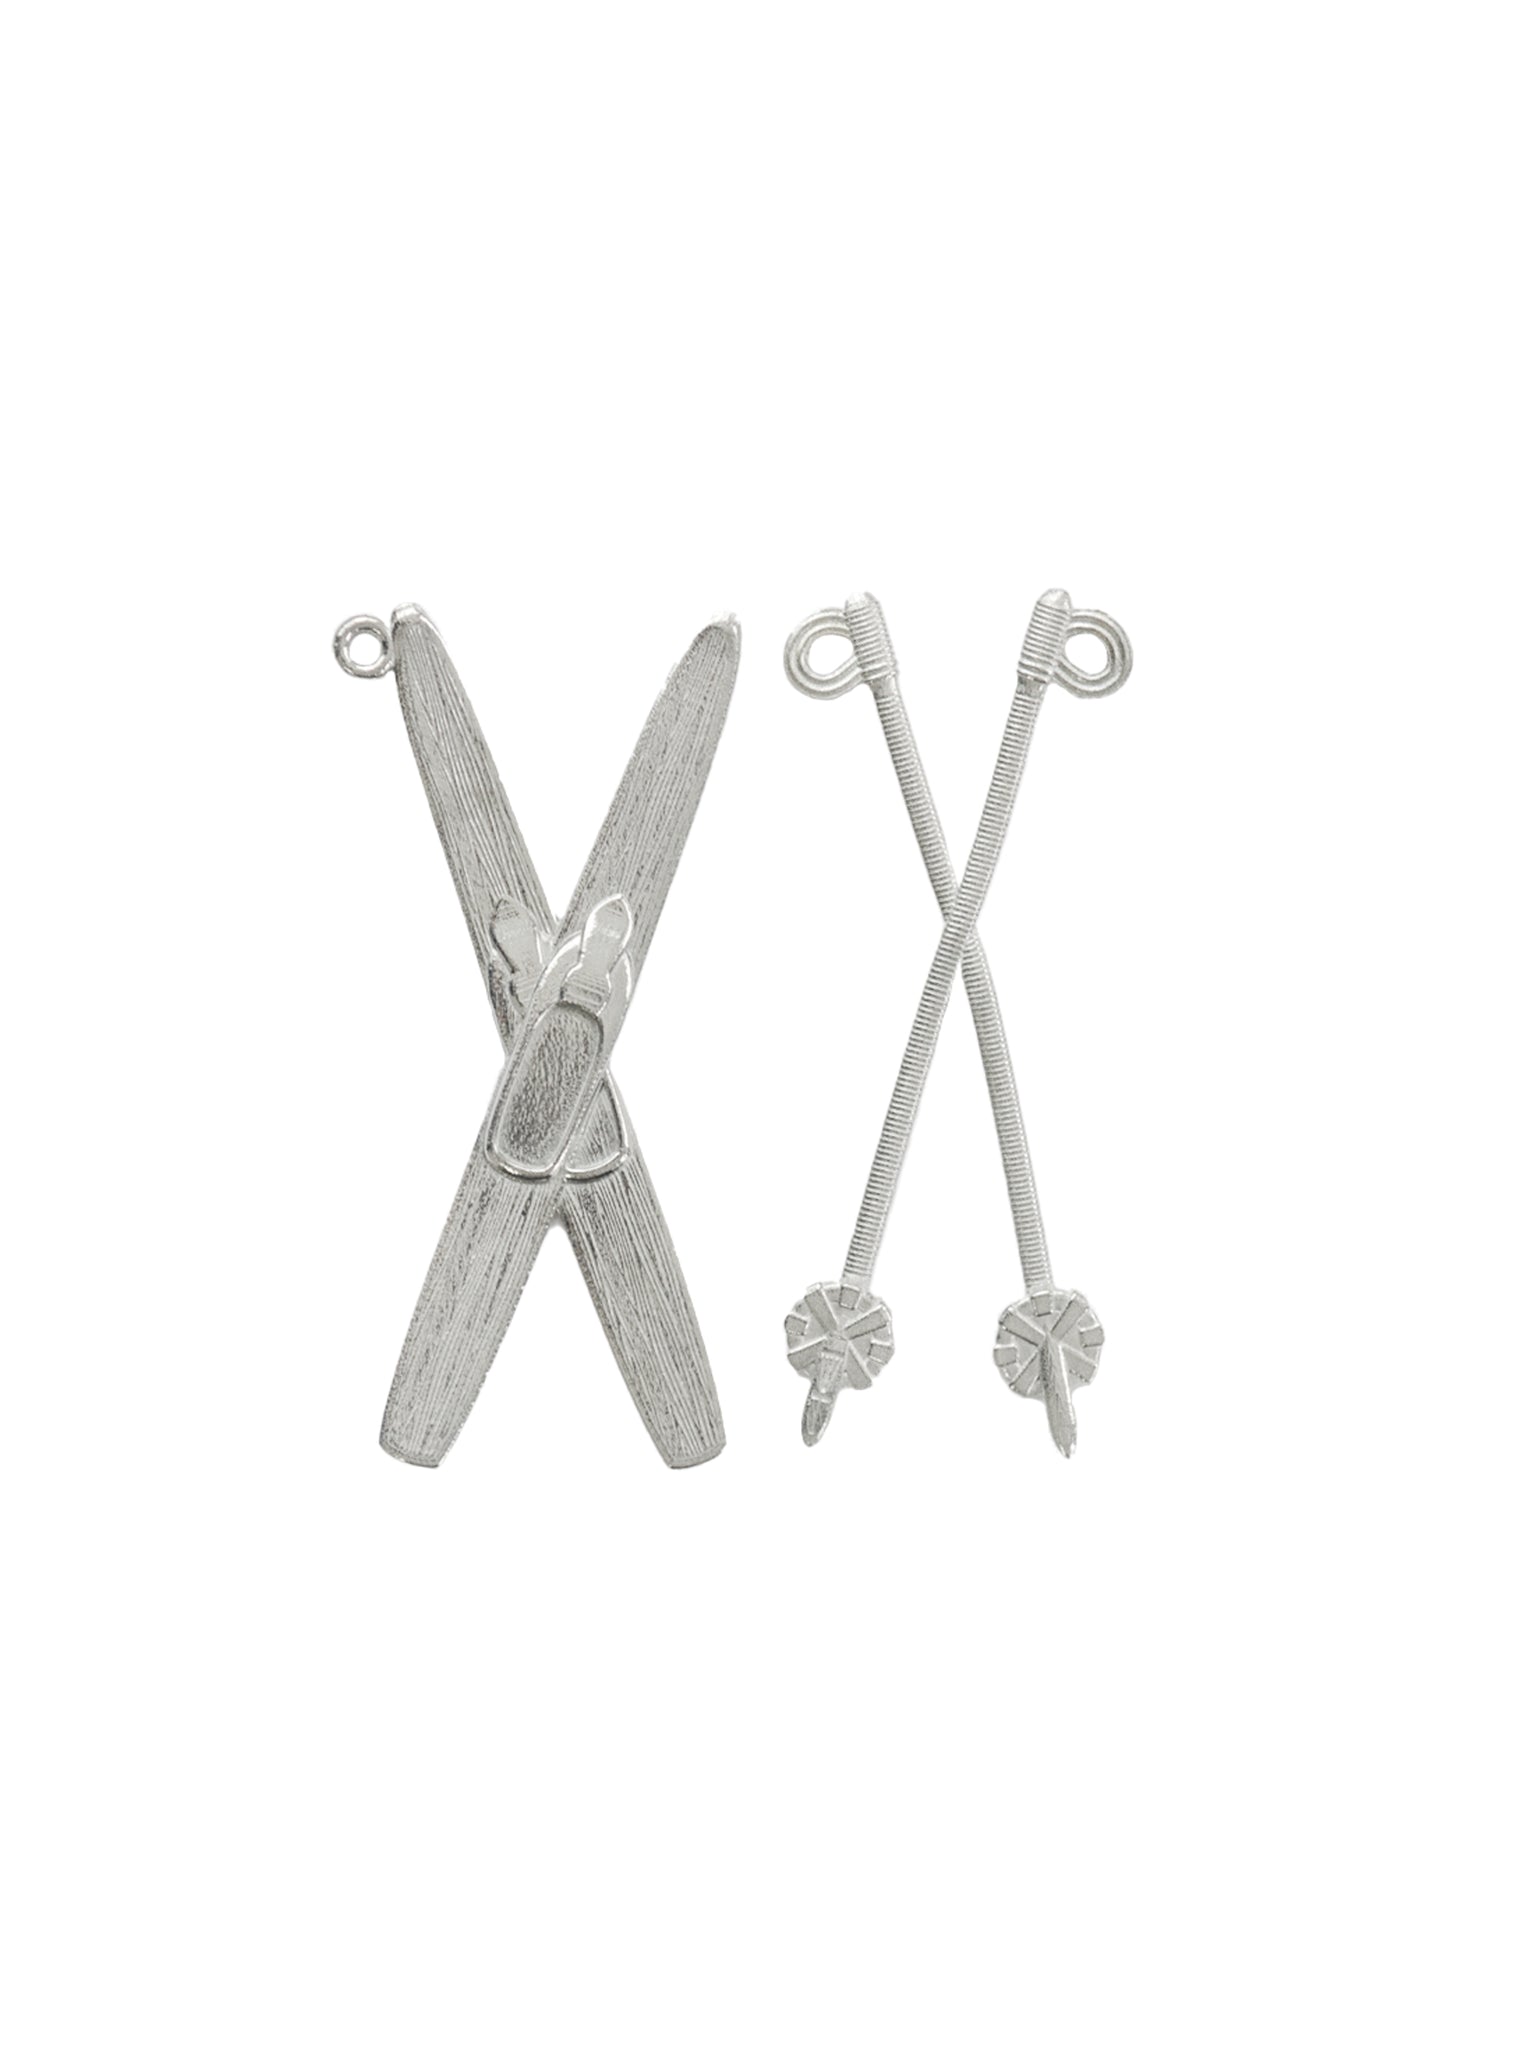 WT Pewter Skis and Poles Ornaments Weston Table